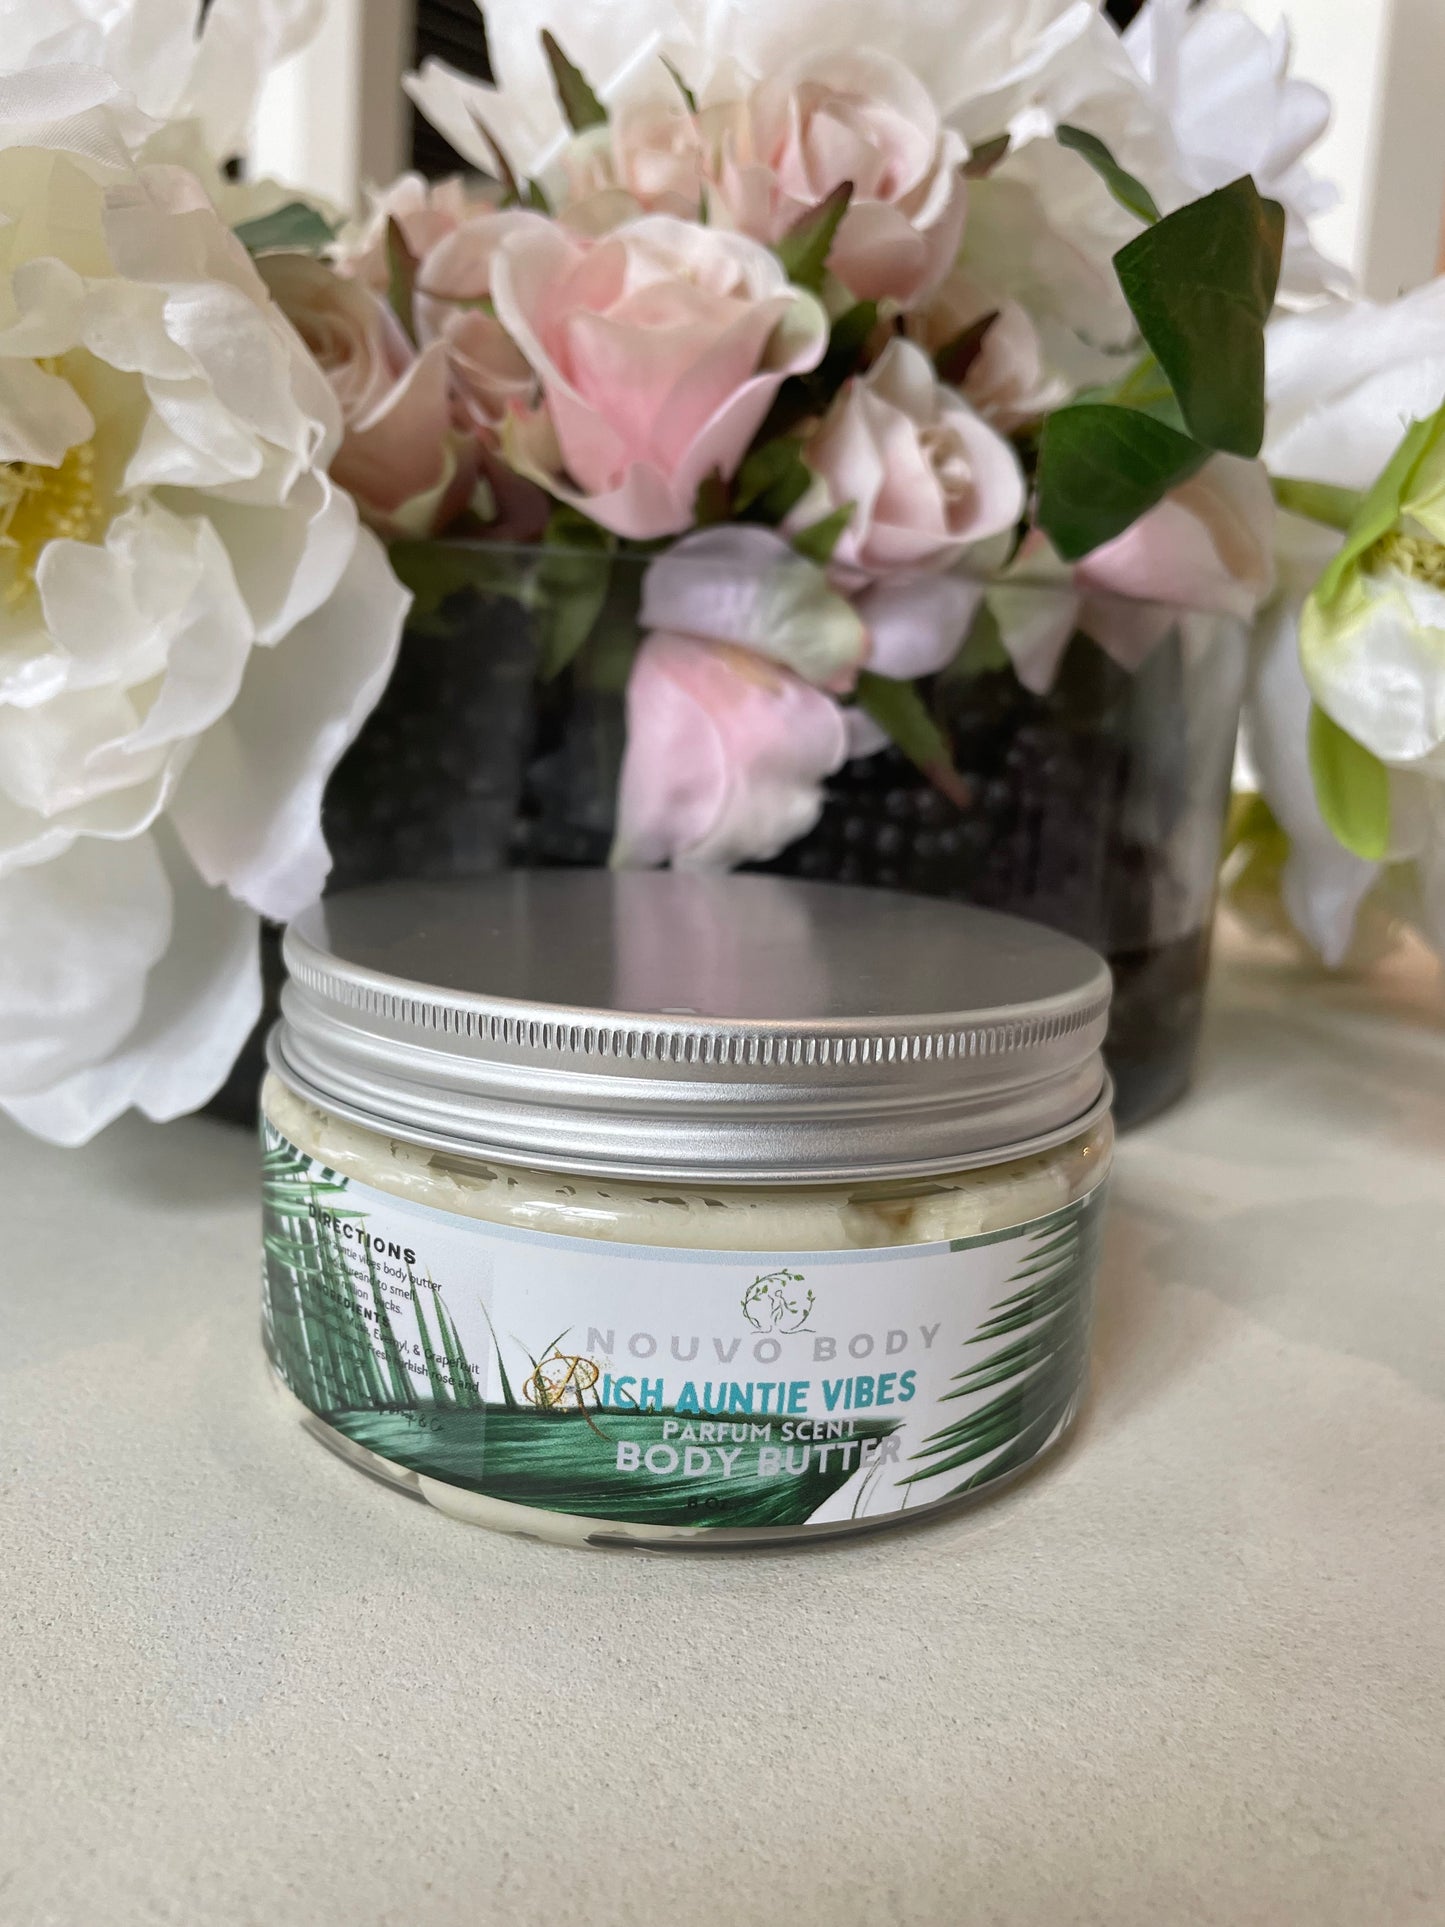 Rich Auntie vibes -Perfume Oil Scent Body Butter (parfum)